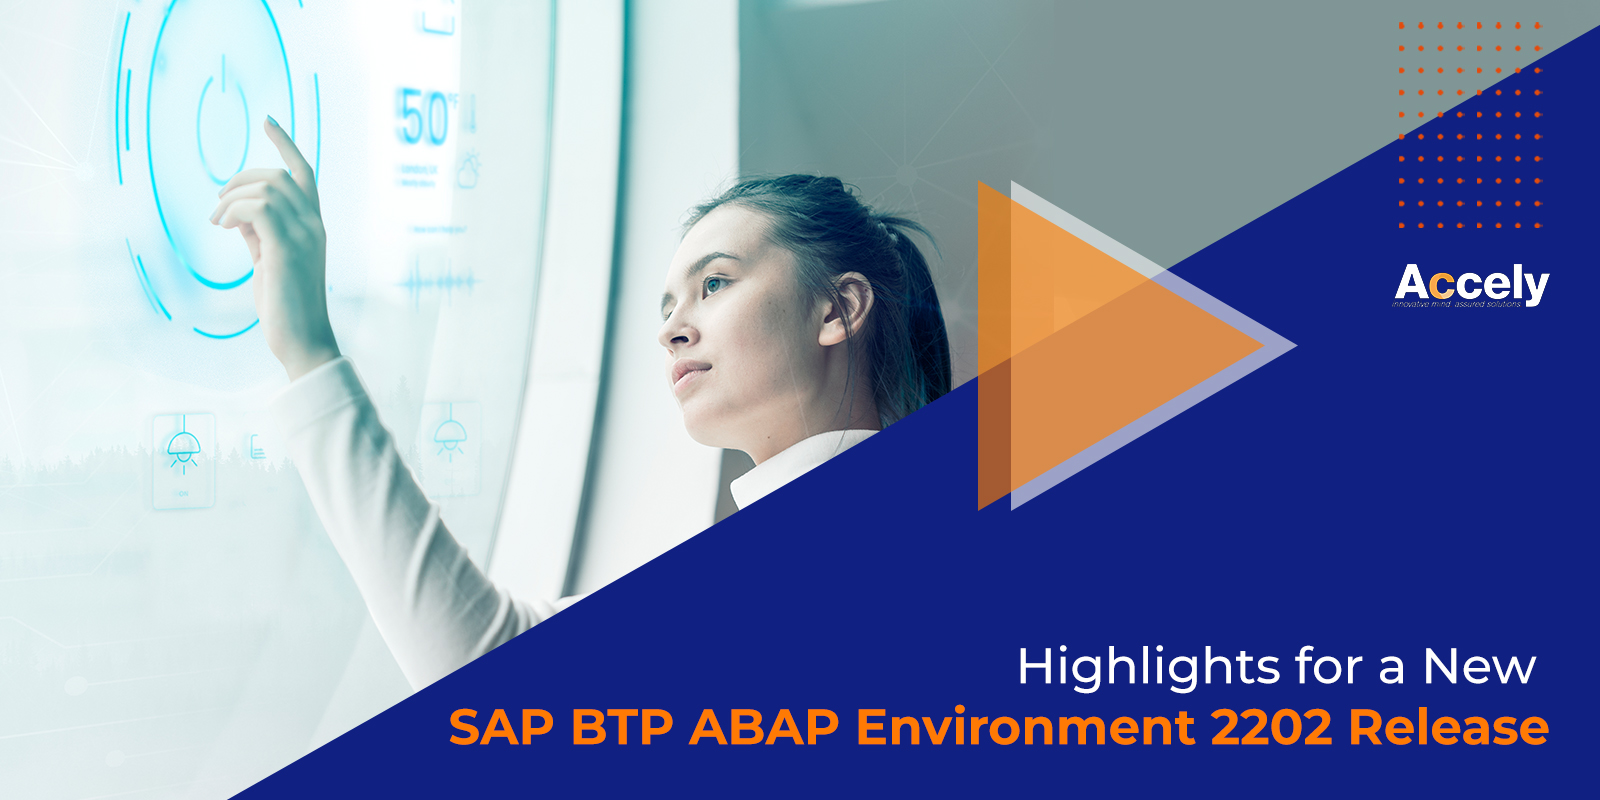 Highlights for a New SAP BTP ABAP Environment 2202 Release